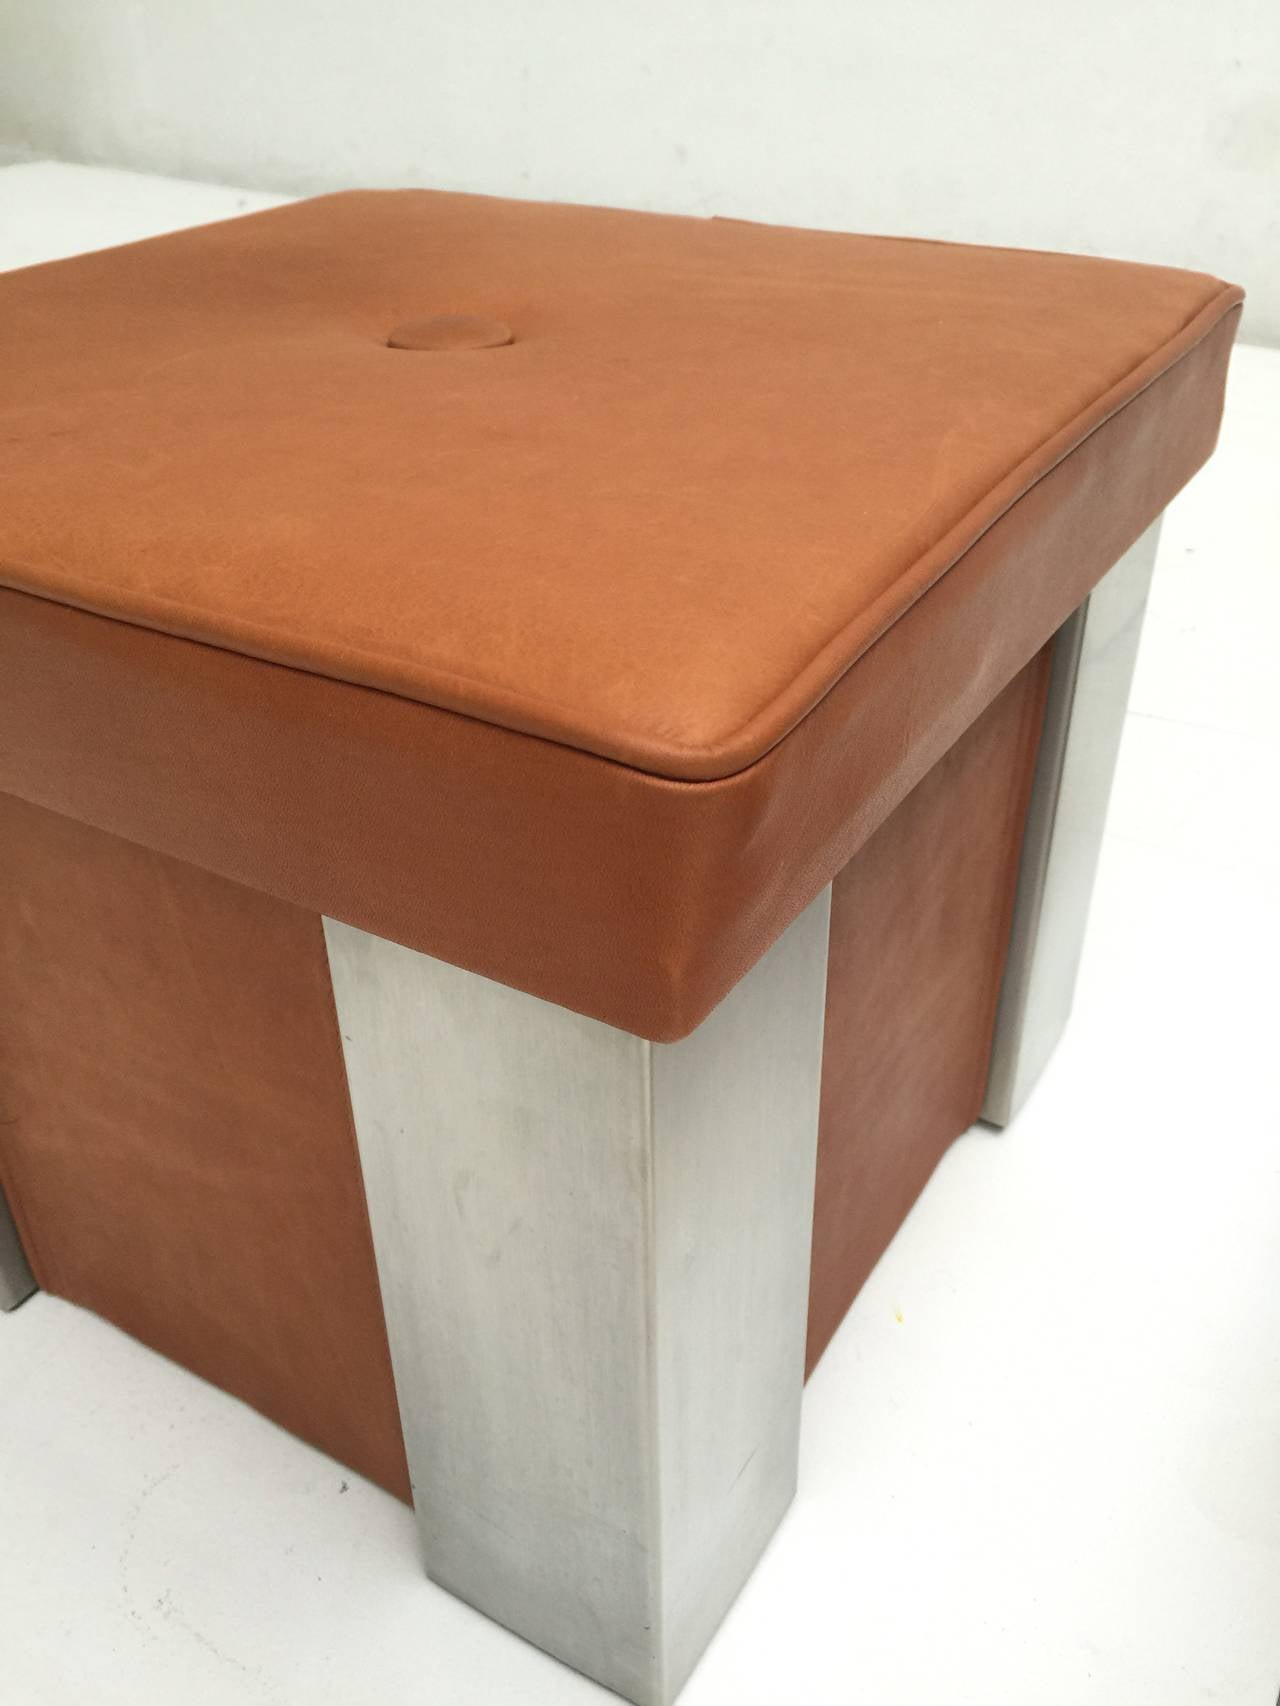 Elegant Pair of Leather and Stainless Steel Stools Attributed to Romeo Rega 1